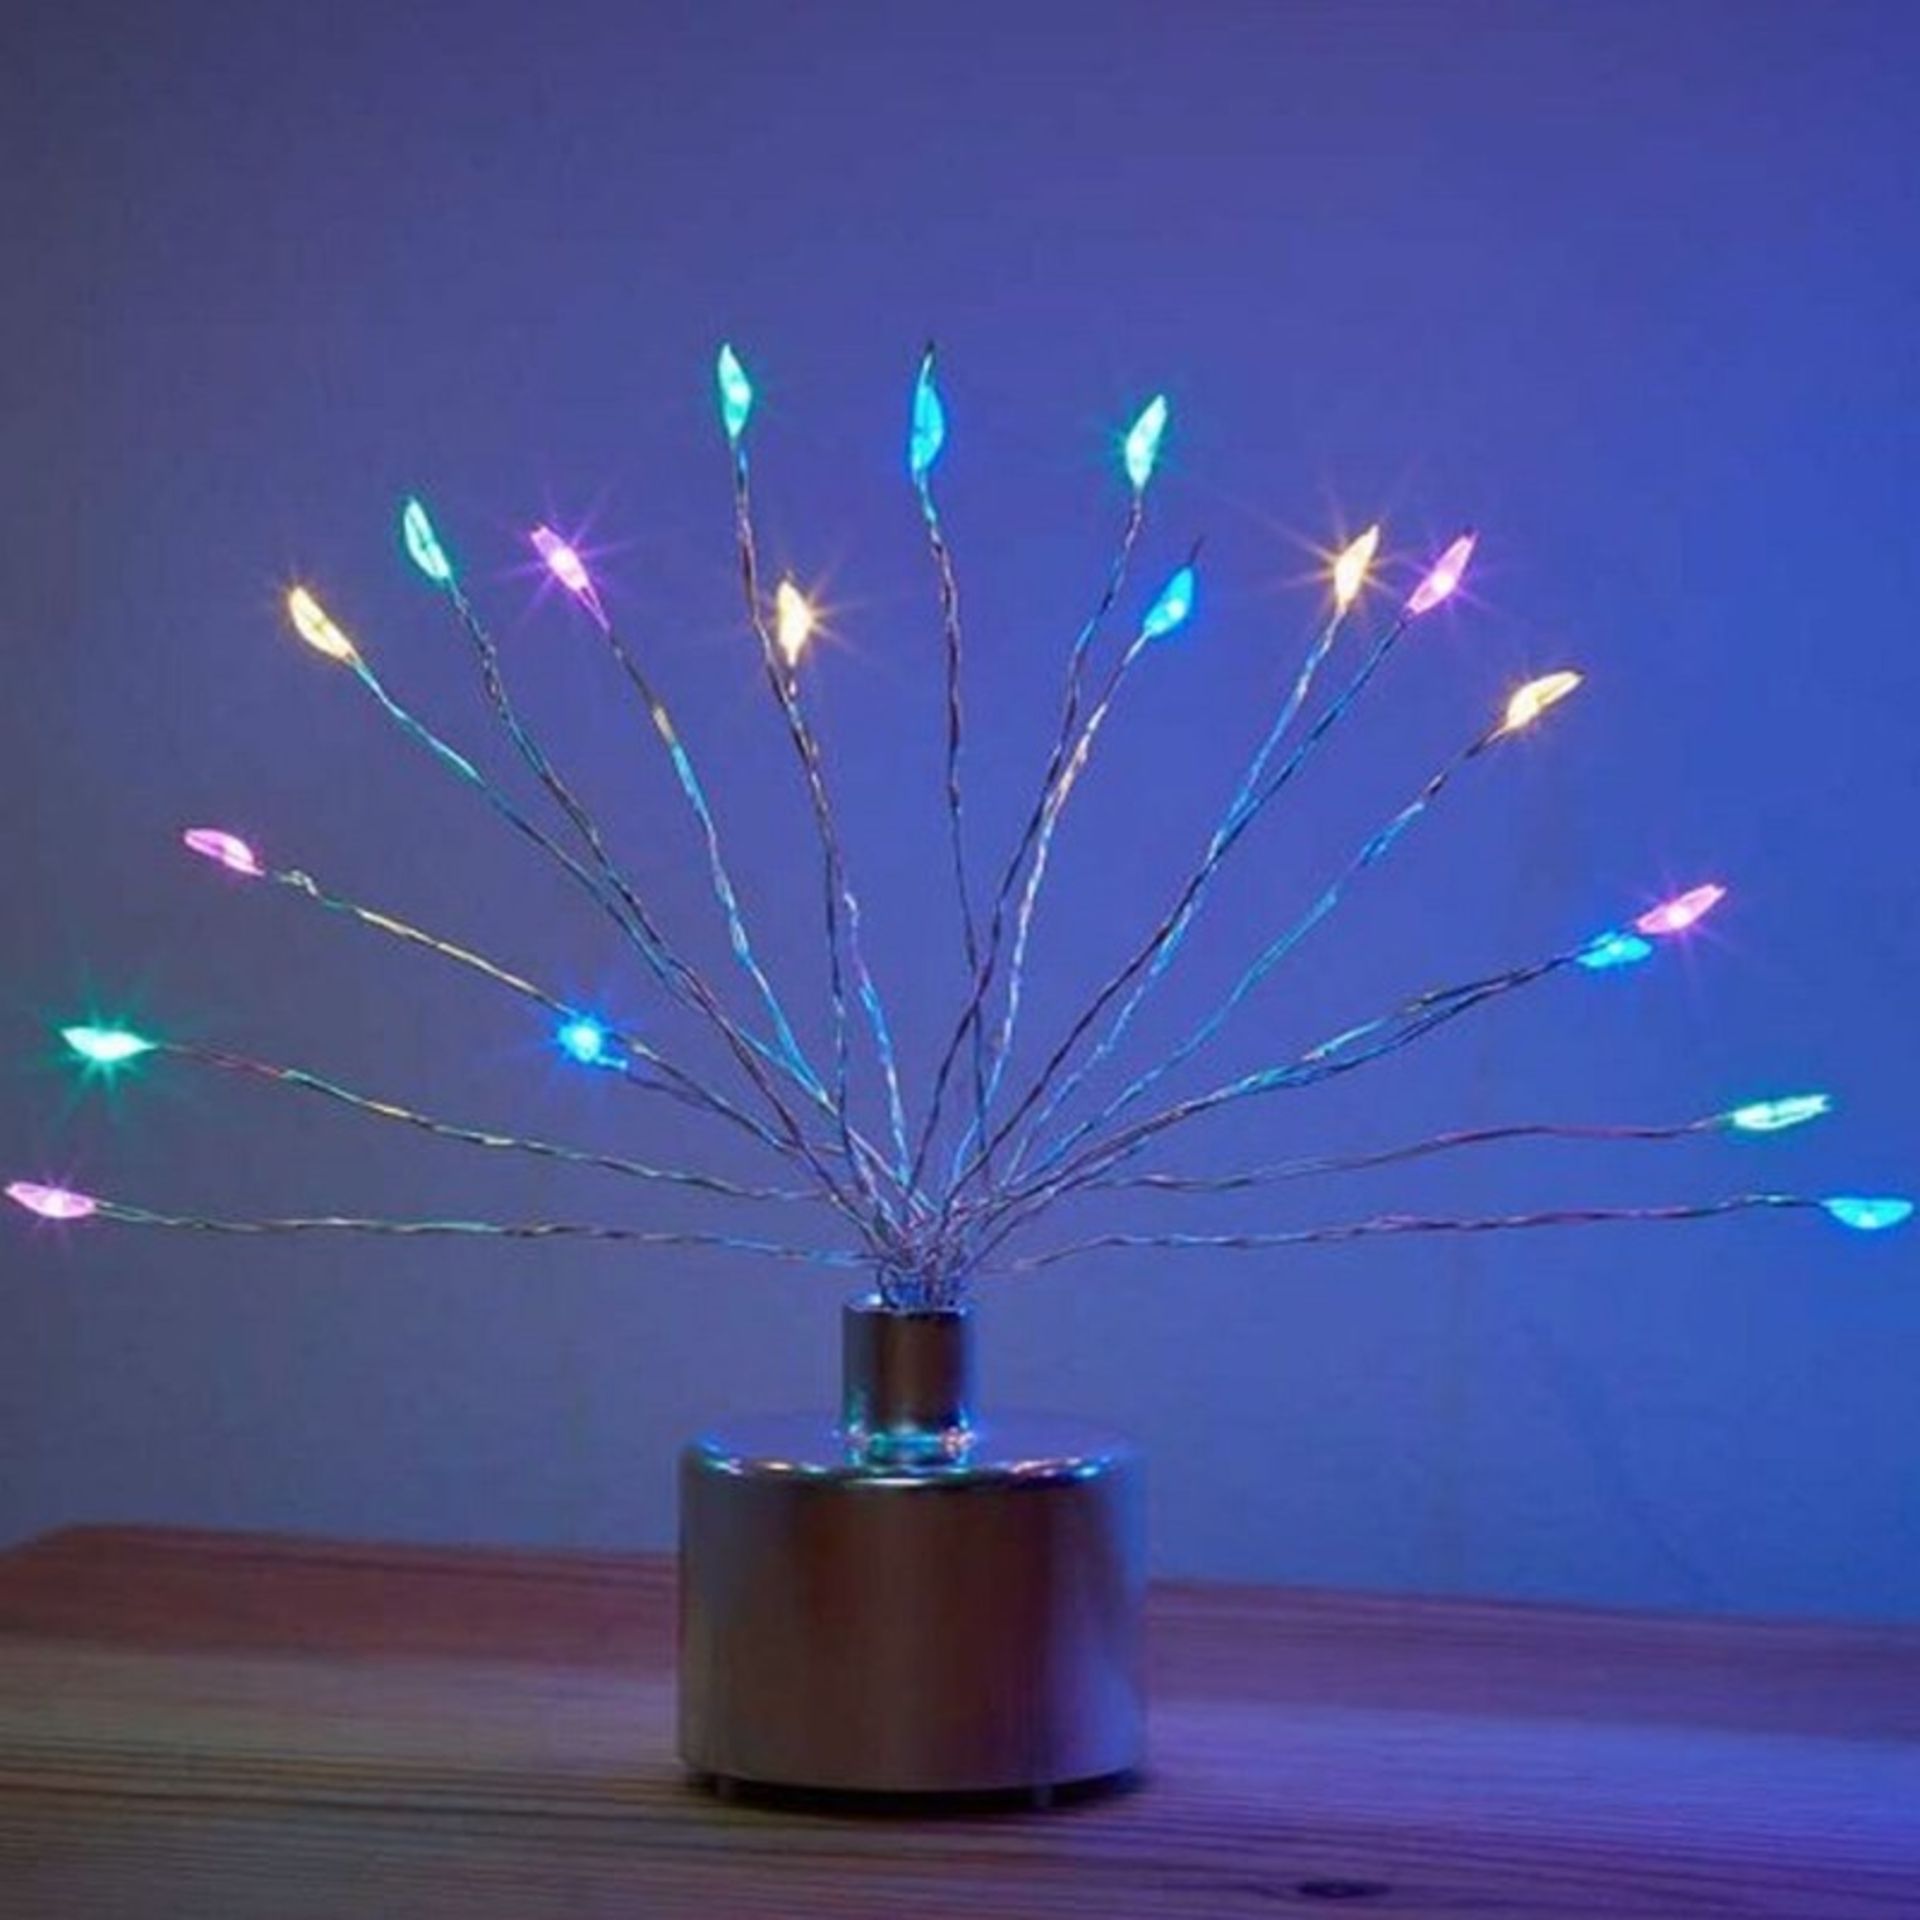 New 4 Pack Of Multi-Colour FireFly Starburst LED Lights With Batteries